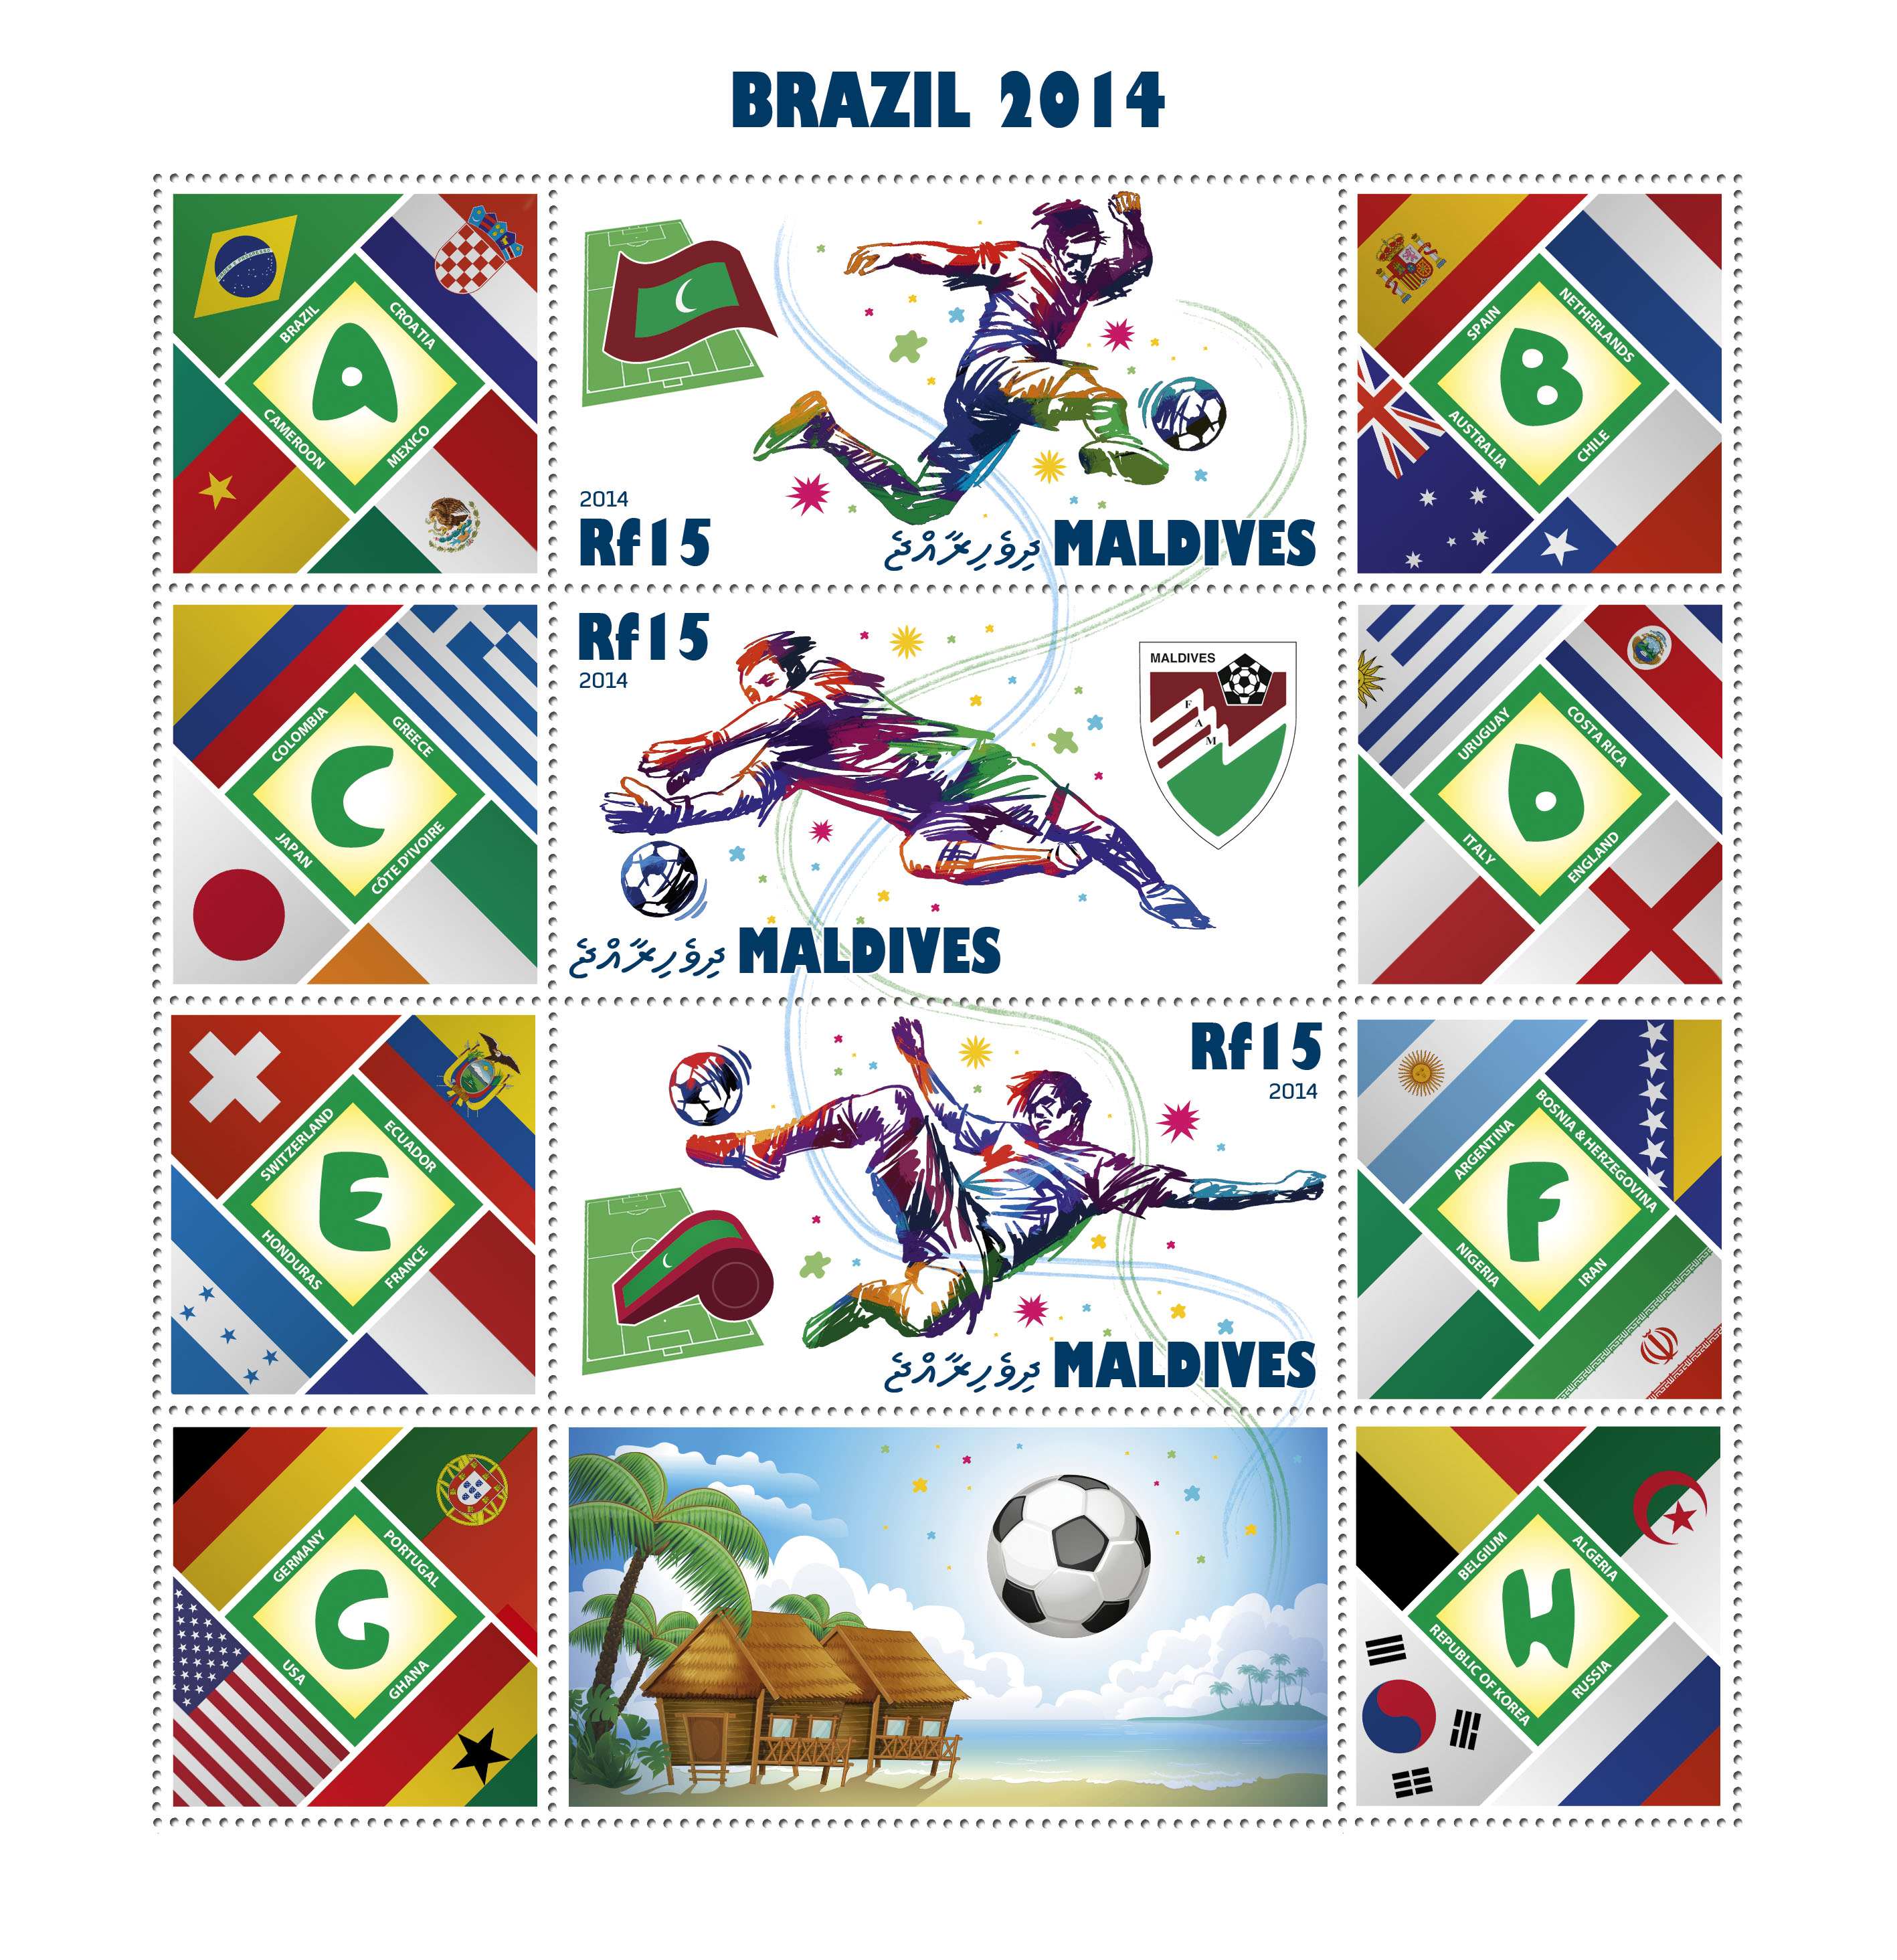 Football - Brazil 2014 (Sheet size - 180 x 195 mm) - Issue of Maldives postage stamps